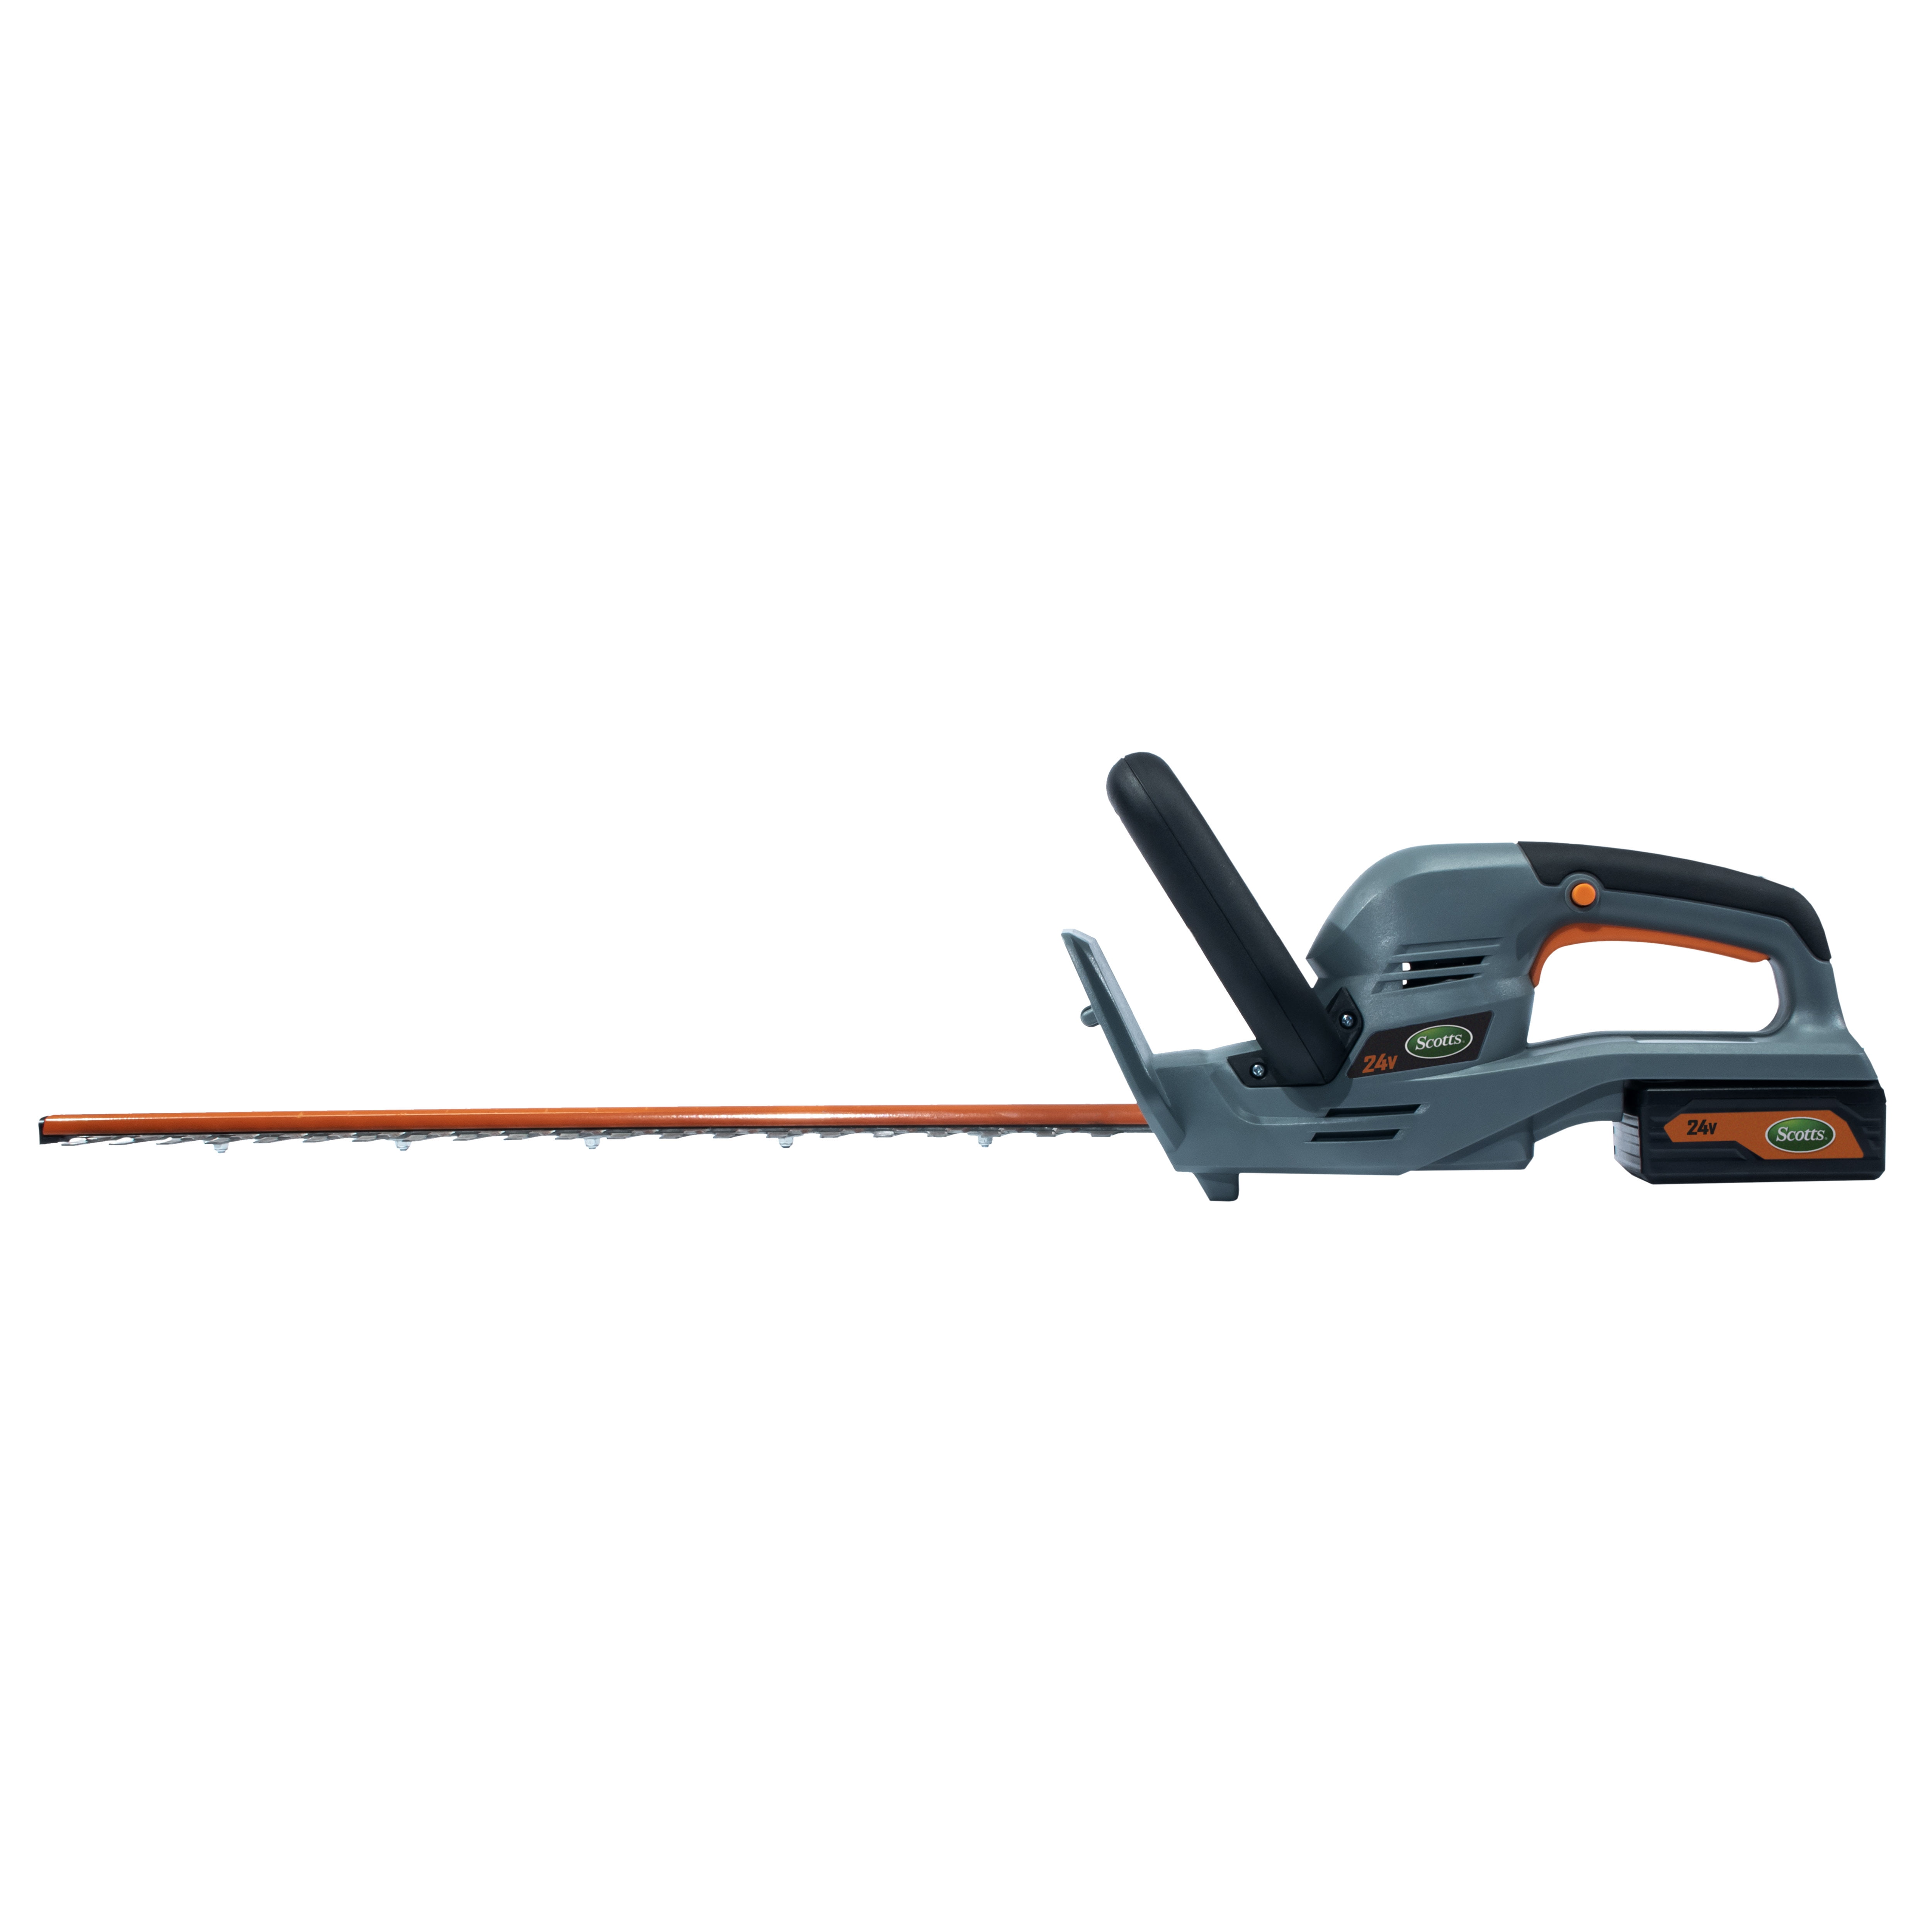 2.5Ah Battery and Fast Charger Included Scotts Outdoor Power Tools LHT12224S 24-Volt 22-Inch Cordless Hedge Trimmer 